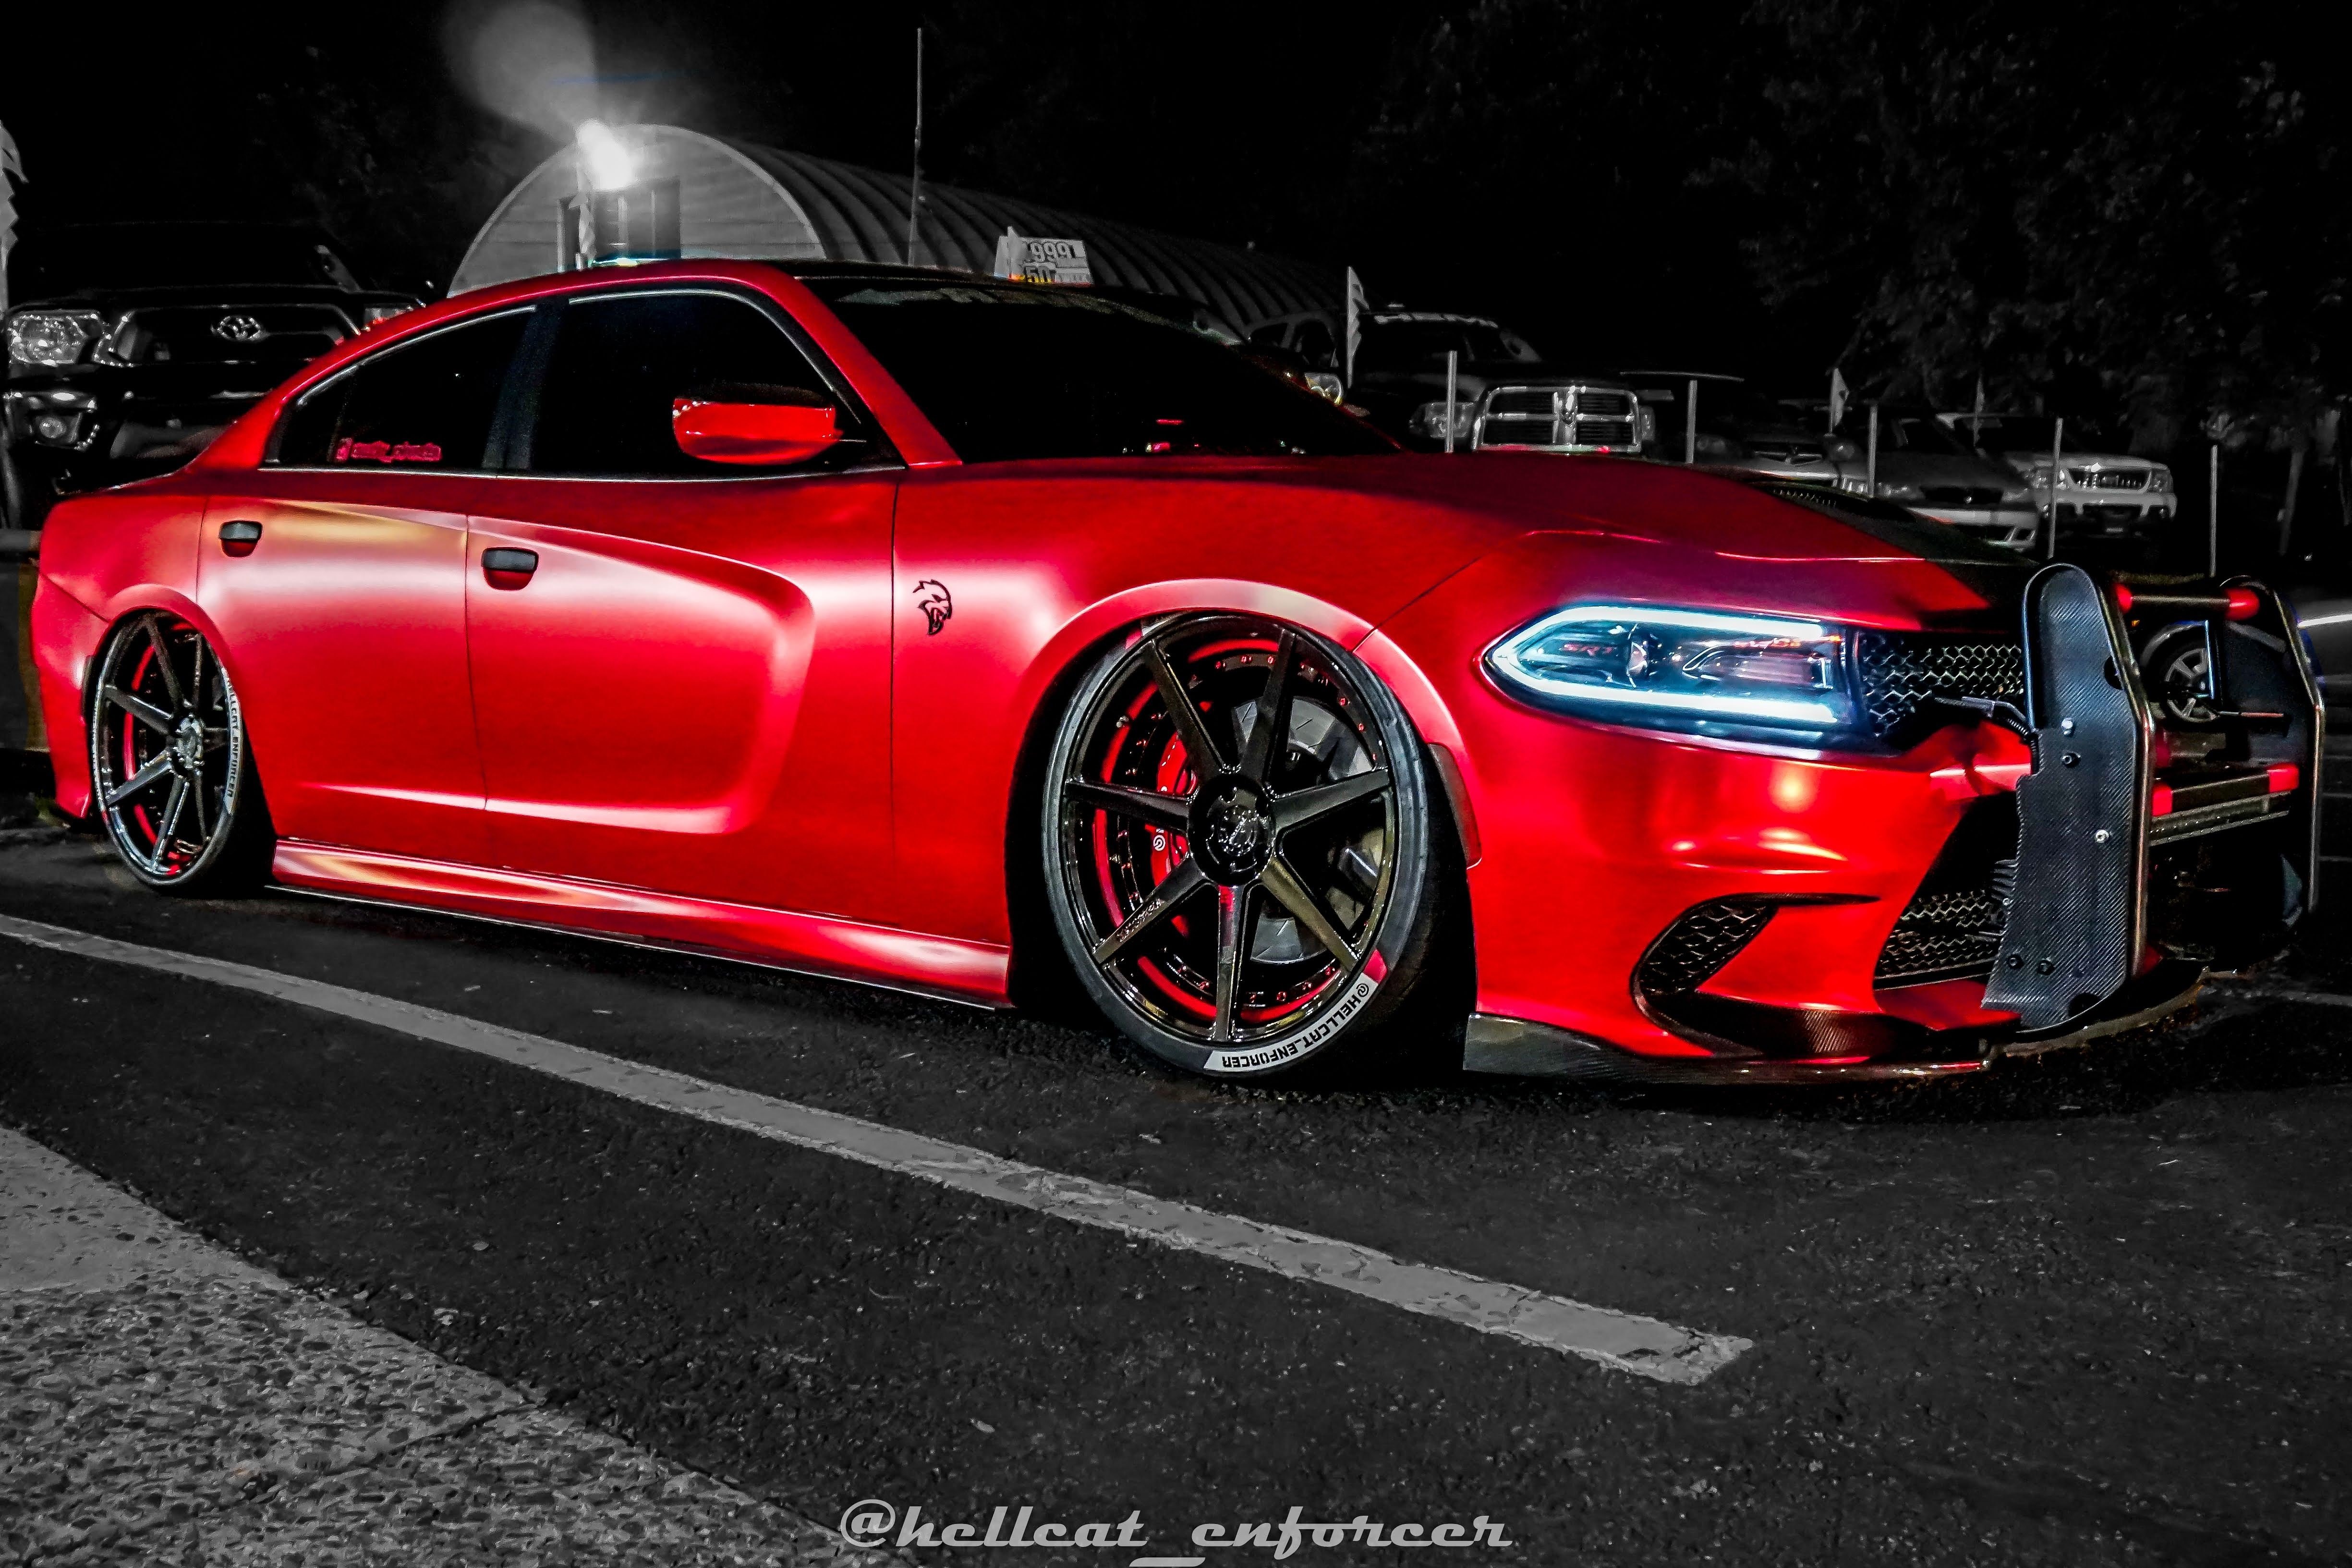 LED-Bar Style Headlights on Red Dodge Charger - Photo by @hellcat_enforcer